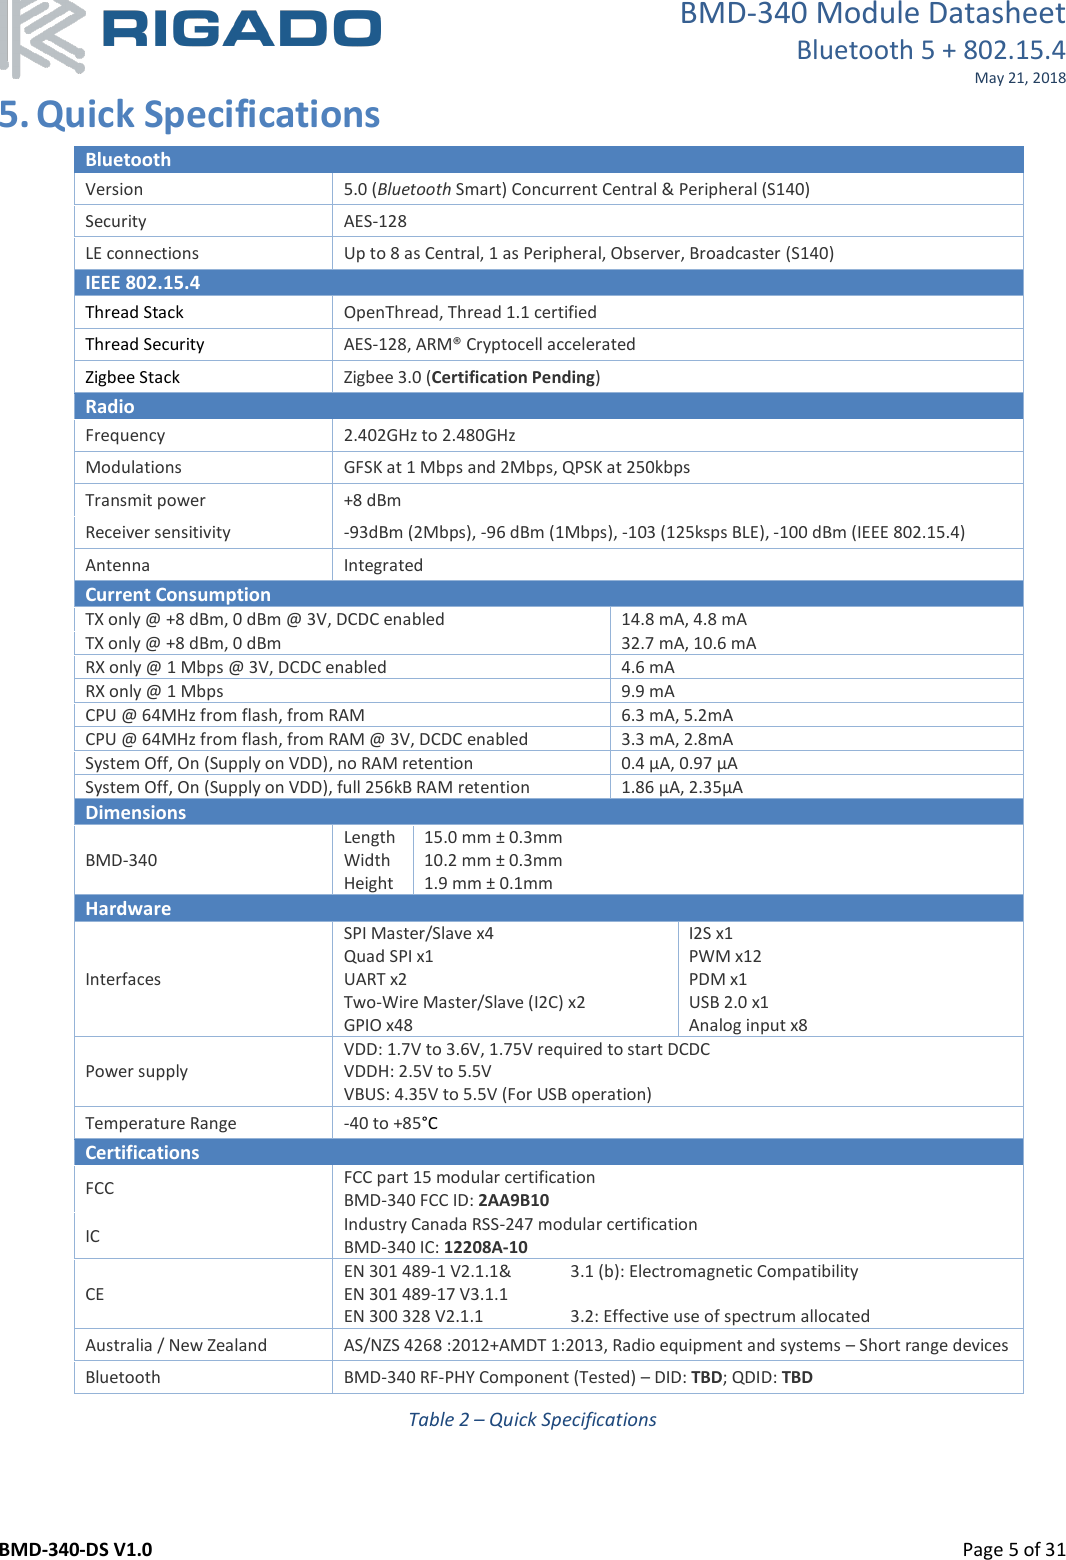 BMD-340 Module Datasheet Bluetooth 5 + 802.15.4 May 21, 2018 BMD-340-DS V1.0         Page 5 of 31 5. Quick Specifications  Bluetooth Version 5.0 (Bluetooth Smart) Concurrent Central &amp; Peripheral (S140) Security AES-128 LE connections Up to 8 as Central, 1 as Peripheral, Observer, Broadcaster (S140) IEEE 802.15.4 Thread Stack OpenThread, Thread 1.1 certified Thread Security AES-128, ARM® Cryptocell accelerated Zigbee Stack Zigbee 3.0 (Certification Pending) Radio Frequency 2.402GHz to 2.480GHz Modulations GFSK at 1 Mbps and 2Mbps, QPSK at 250kbps Transmit power +8 dBm Receiver sensitivity -93dBm (2Mbps), -96 dBm (1Mbps), -103 (125ksps BLE), -100 dBm (IEEE 802.15.4) Antenna  Integrated Current Consumption TX only @ +8 dBm, 0 dBm @ 3V, DCDC enabled 14.8 mA, 4.8 mA TX only @ +8 dBm, 0 dBm 32.7 mA, 10.6 mA RX only @ 1 Mbps @ 3V, DCDC enabled 4.6 mA RX only @ 1 Mbps 9.9 mA CPU @ 64MHz from flash, from RAM 6.3 mA, 5.2mA CPU @ 64MHz from flash, from RAM @ 3V, DCDC enabled 3.3 mA, 2.8mA System Off, On (Supply on VDD), no RAM retention 0.4 µA, 0.97 µA System Off, On (Supply on VDD), full 256kB RAM retention 1.86 µA, 2.35µA Dimensions BMD-340 Length Width Height 15.0 mm ± 0.3mm 10.2 mm ± 0.3mm 1.9 mm ± 0.1mm Hardware Interfaces SPI Master/Slave x4 Quad SPI x1 UART x2 Two-Wire Master/Slave (I2C) x2 GPIO x48 I2S x1 PWM x12 PDM x1 USB 2.0 x1 Analog input x8 Power supply VDD: 1.7V to 3.6V, 1.75V required to start DCDC VDDH: 2.5V to 5.5V VBUS: 4.35V to 5.5V (For USB operation) Temperature Range -40 to +85°C Certifications FCC FCC part 15 modular certification BMD-340 FCC ID: 2AA9B10 IC Industry Canada RSS-247 modular certification BMD-340 IC: 12208A-10 CE EN 301 489-1 V2.1.1&amp;  3.1 (b): Electromagnetic Compatibility EN 301 489-17 V3.1.1   EN 300 328 V2.1.1  3.2: Effective use of spectrum allocated Australia / New Zealand AS/NZS 4268 :2012+AMDT 1:2013, Radio equipment and systems – Short range devices Bluetooth BMD-340 RF-PHY Component (Tested) – DID: TBD; QDID: TBD Table 2 – Quick Specifications 